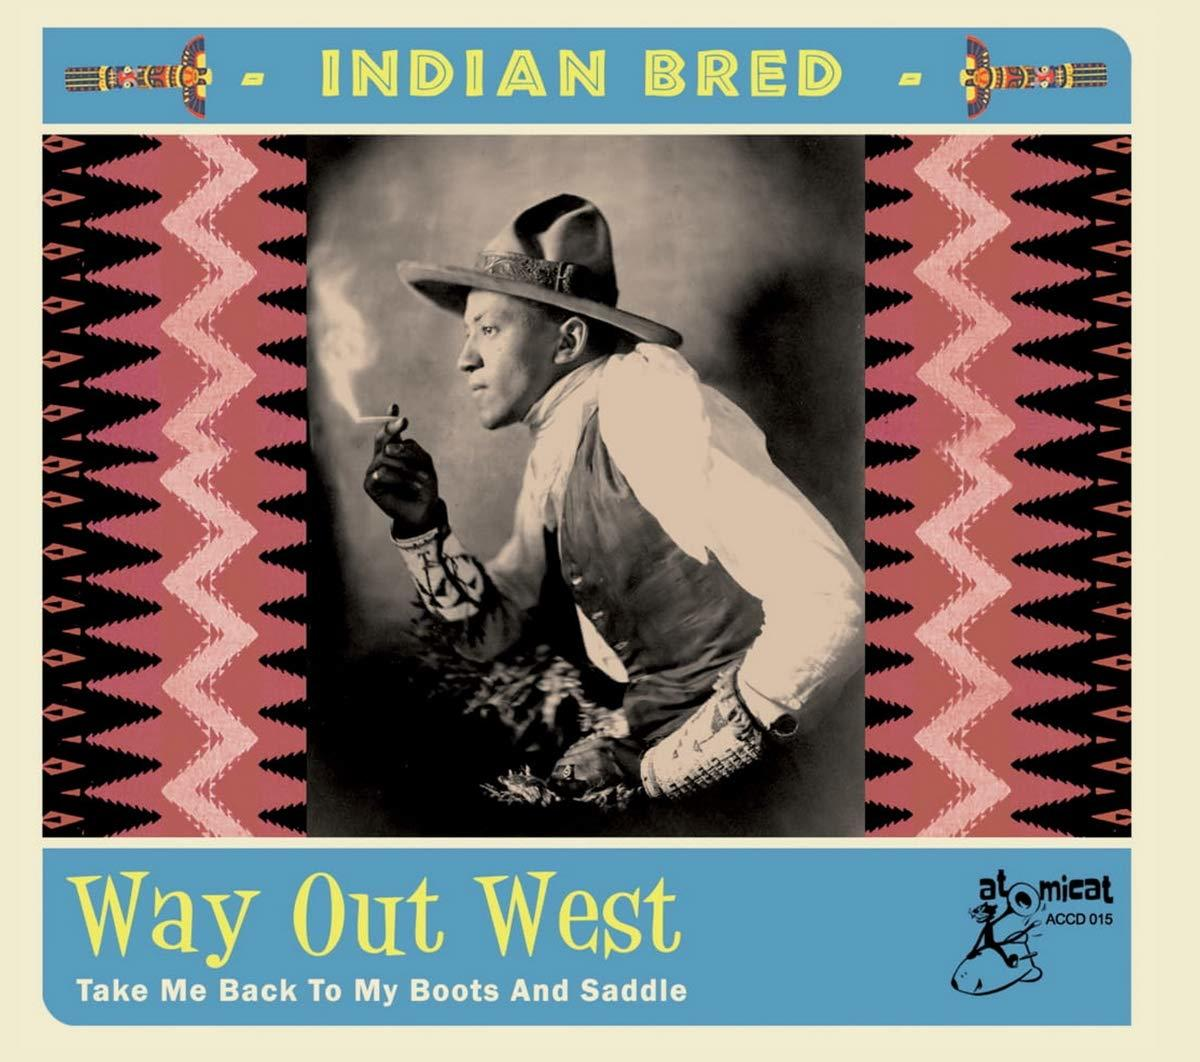 VARIOUS (CD) - Out West - Bred-Way Indian